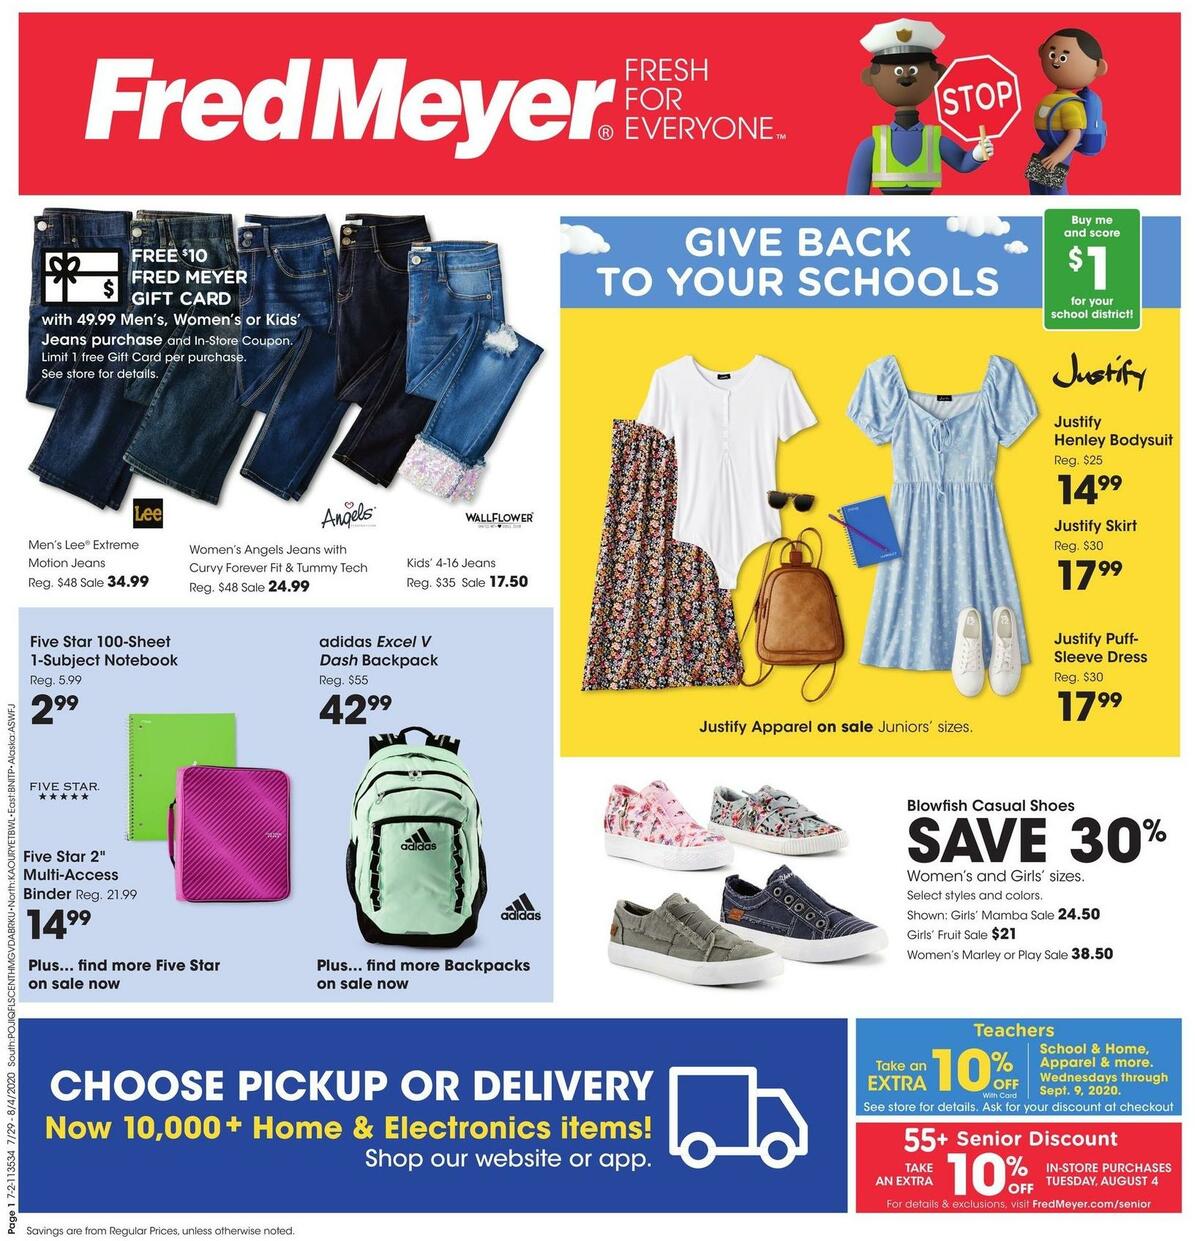 Fred Meyer General Merchandise Weekly Ad & Specials from July 29